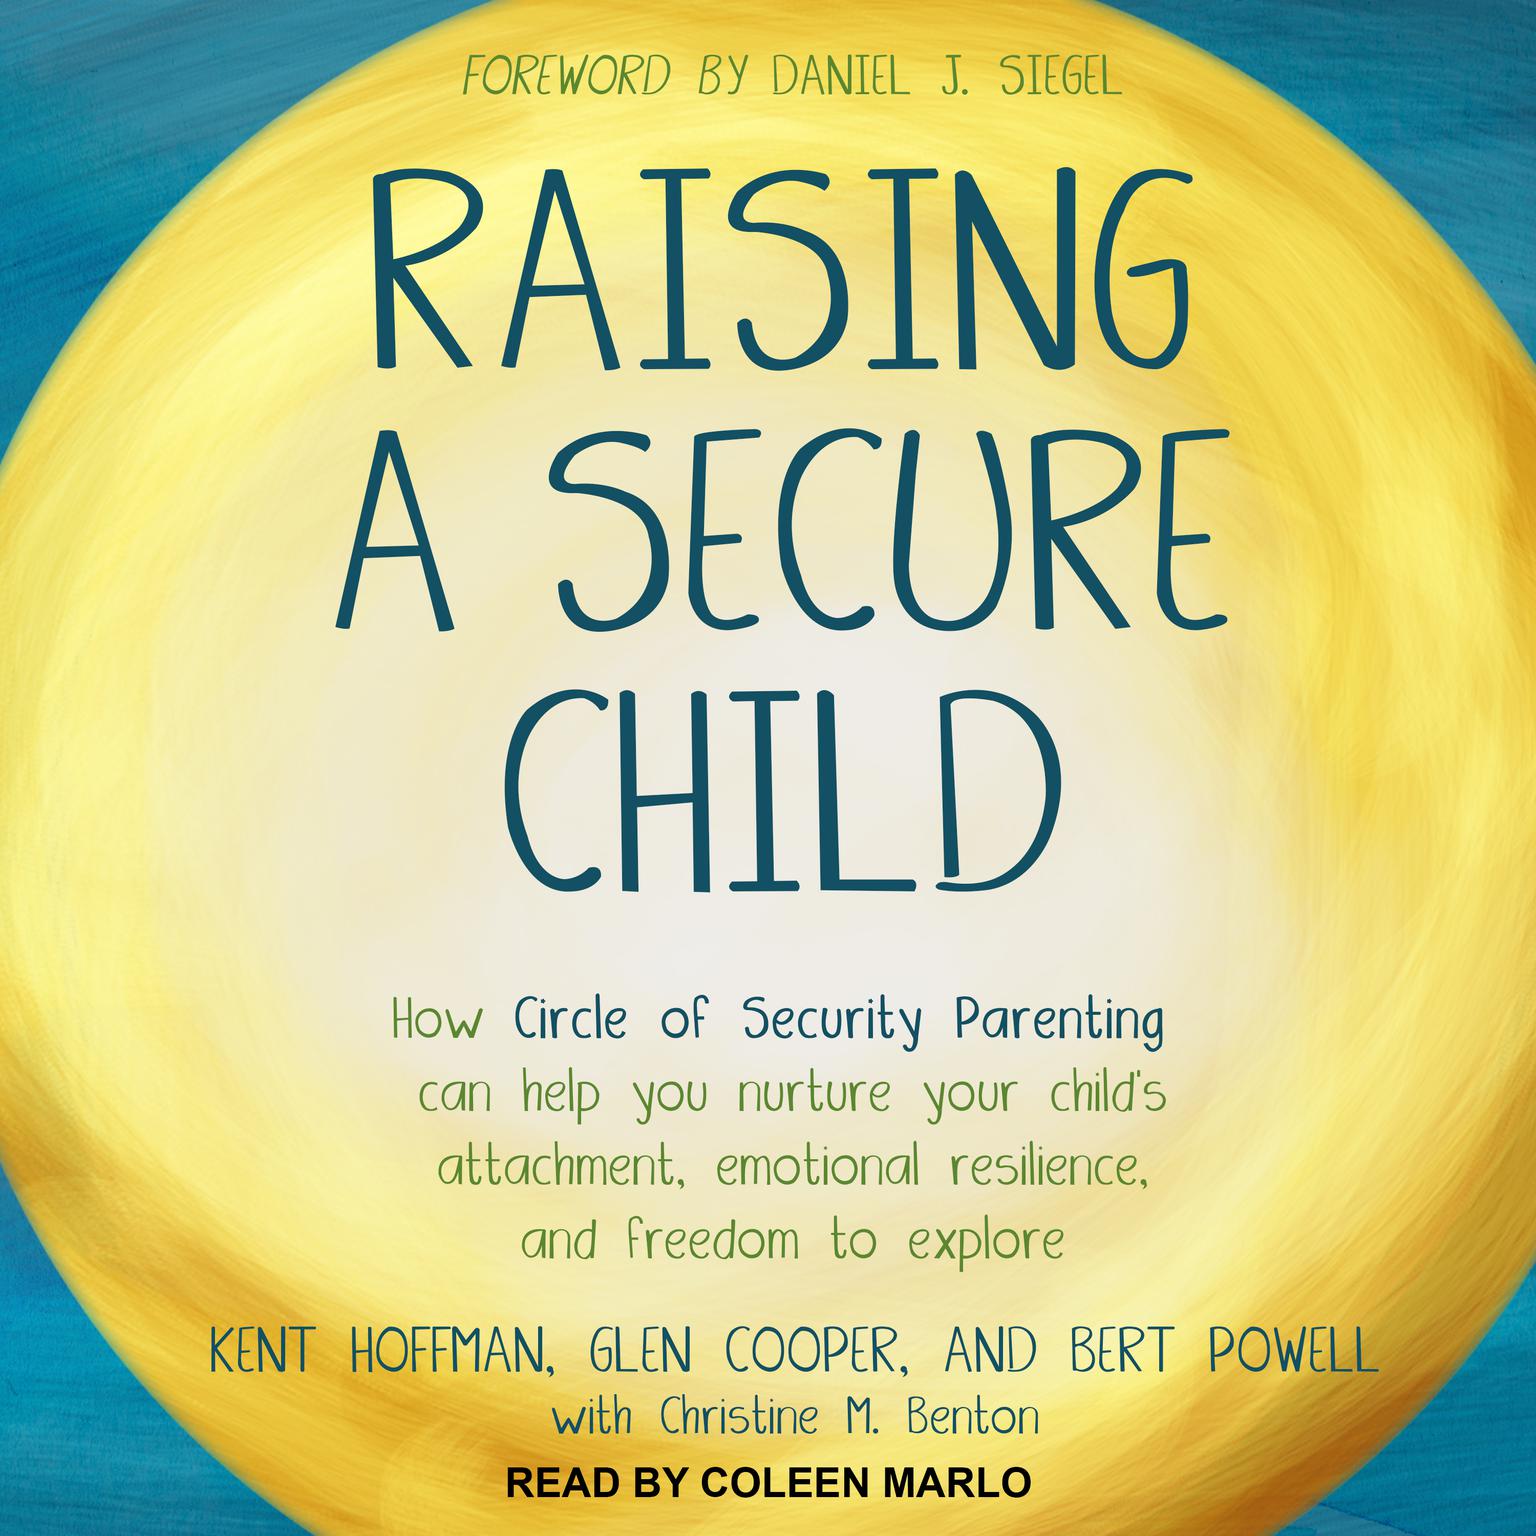 Raising a Secure Child: How Circle of Security Parenting Can Help You Nurture Your Childs Attachment, Emotional Resilience, and Freedom to Explore Audiobook, by Kent Hoffman